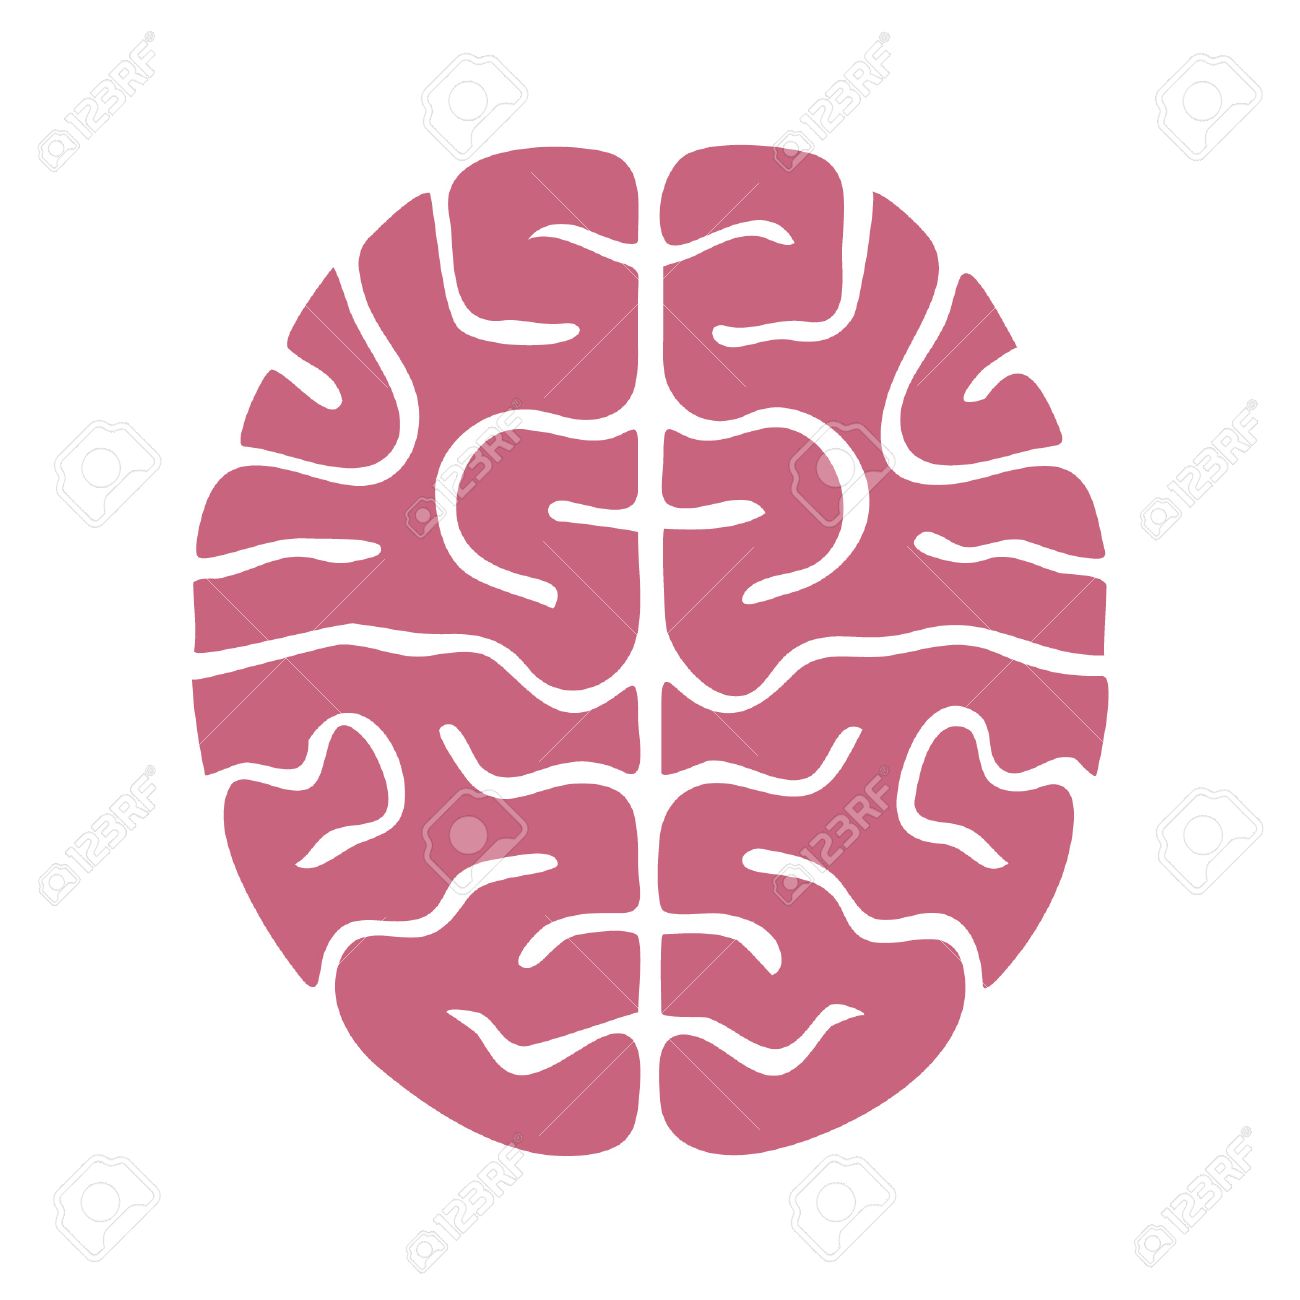 Flat icon in black and white human brain Vector Image